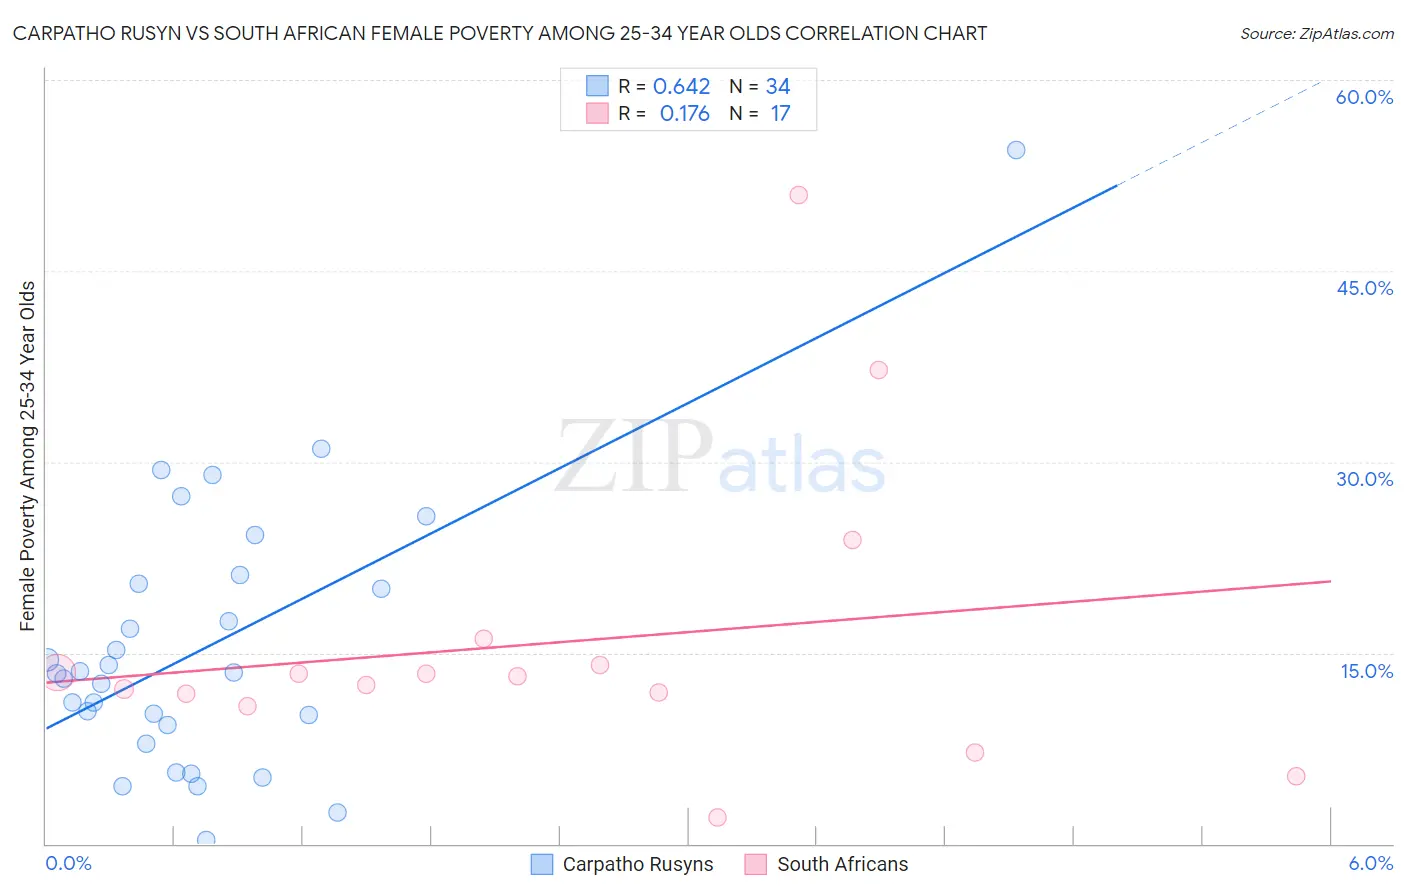 Carpatho Rusyn vs South African Female Poverty Among 25-34 Year Olds